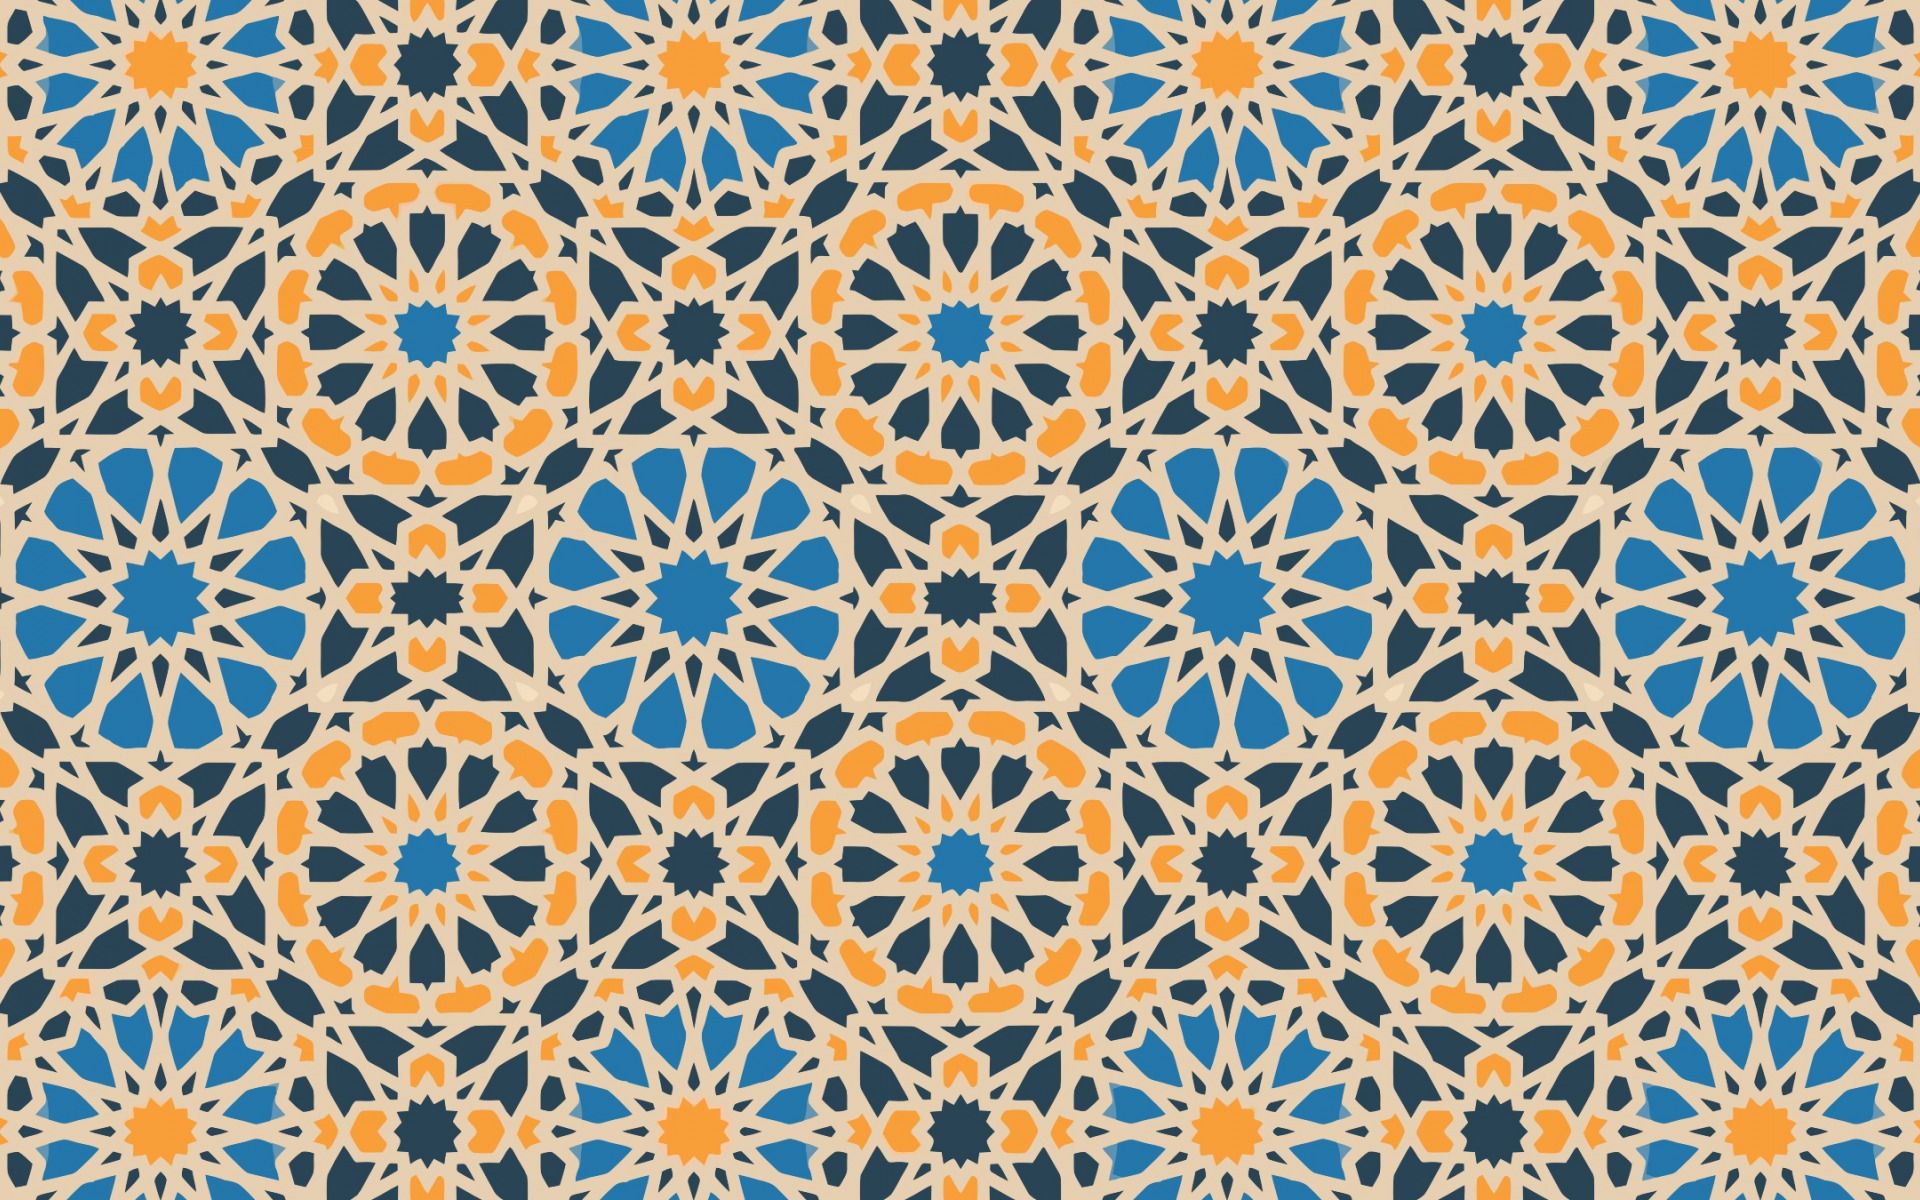 Download wallpaper blue orange islamic texture, islamic background, flowers islamic texture, retro islamic texture, islamic pattern for desktop with resolution 1920x1200. High Quality HD picture wallpaper